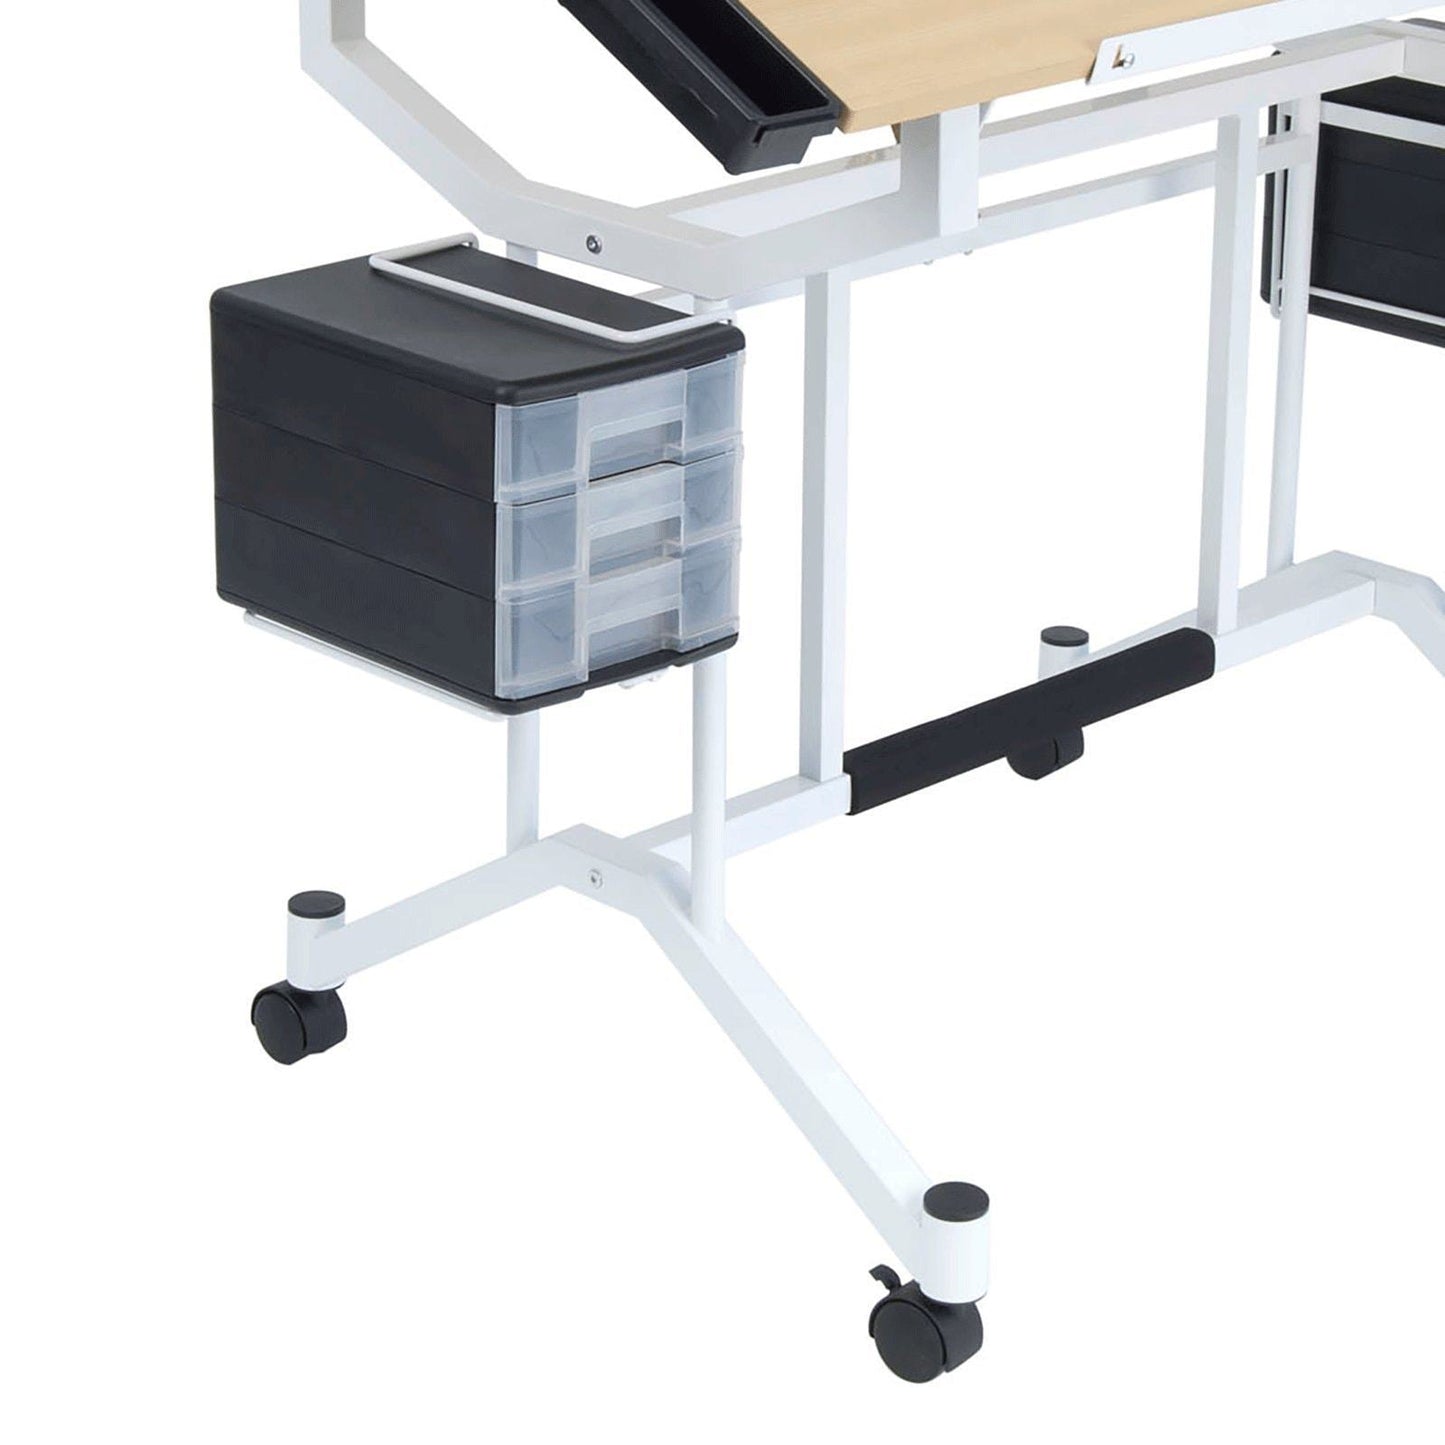 Get studio designs pro craft station in white with maple 13245